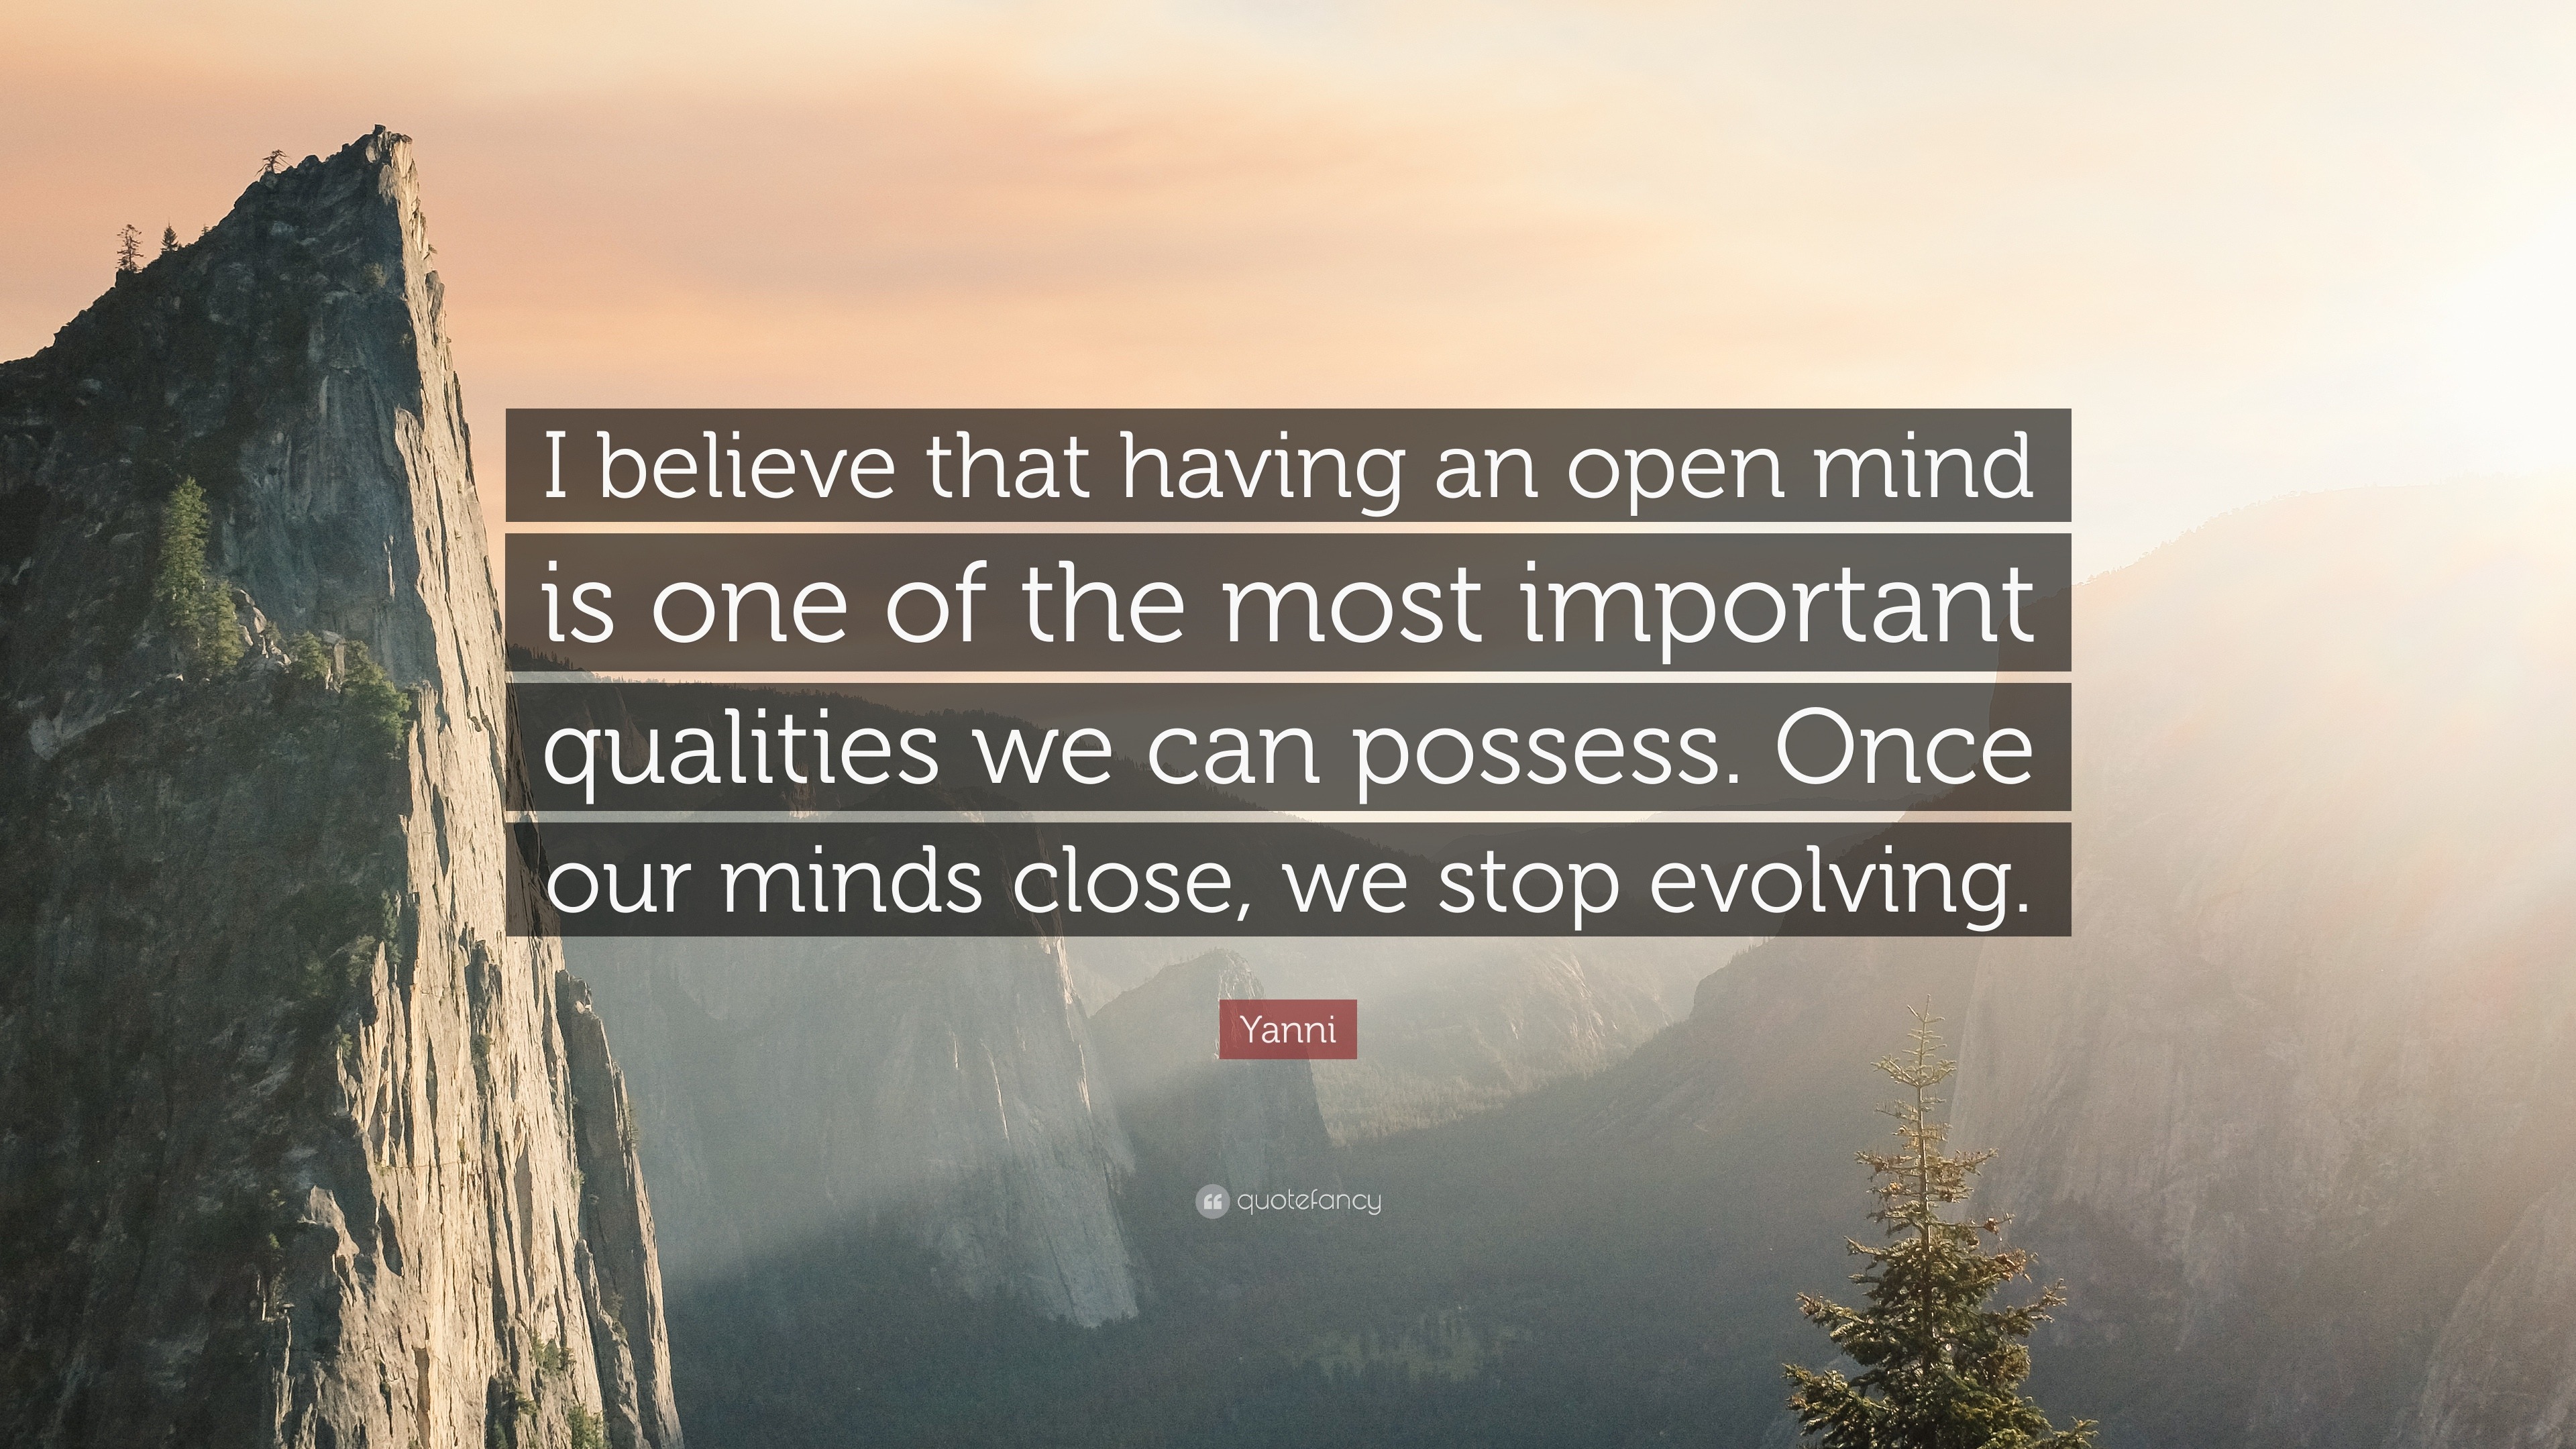 Yanni Quote: “I believe that having an open mind is one of the most  important qualities we can possess. Once our minds close, we stop ”